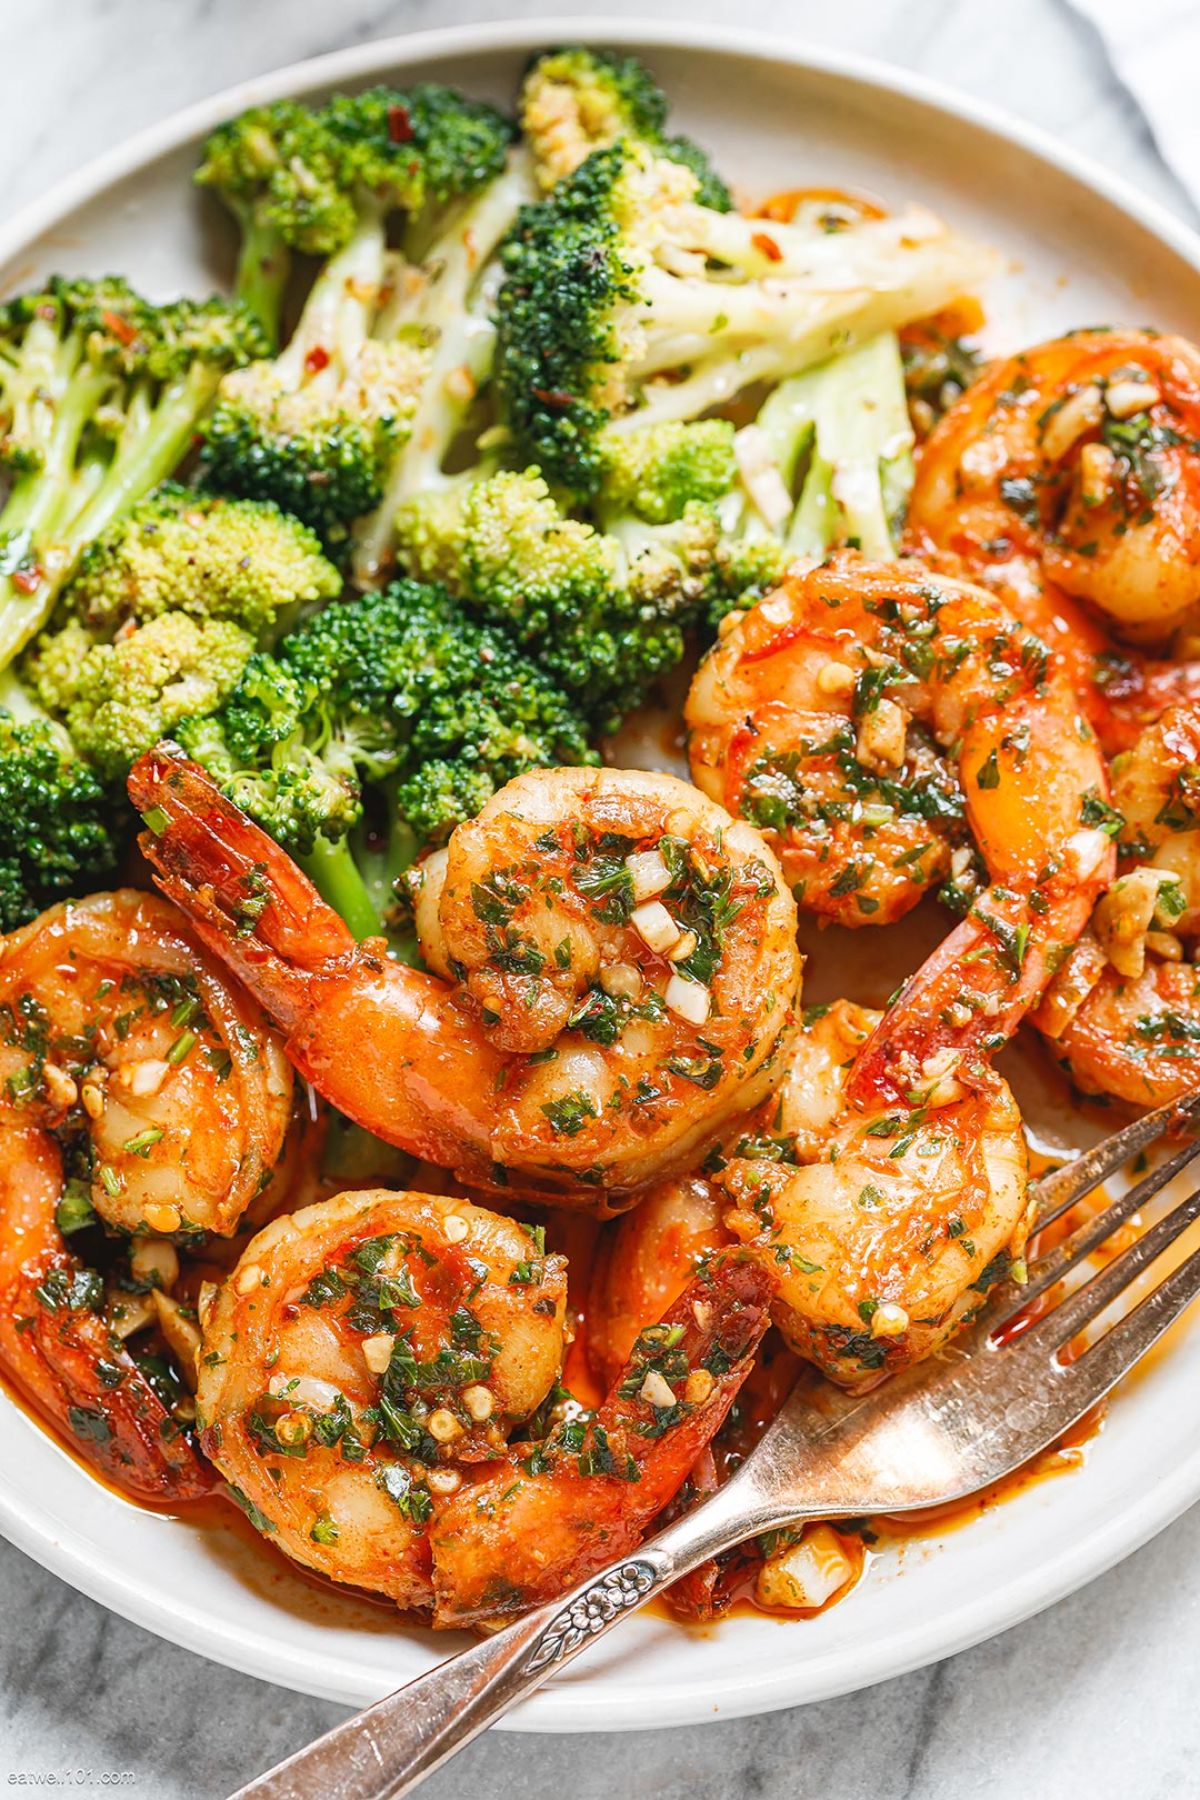 Scrumptious garlic butter shrimp and broccoli on a white plate with a fork.